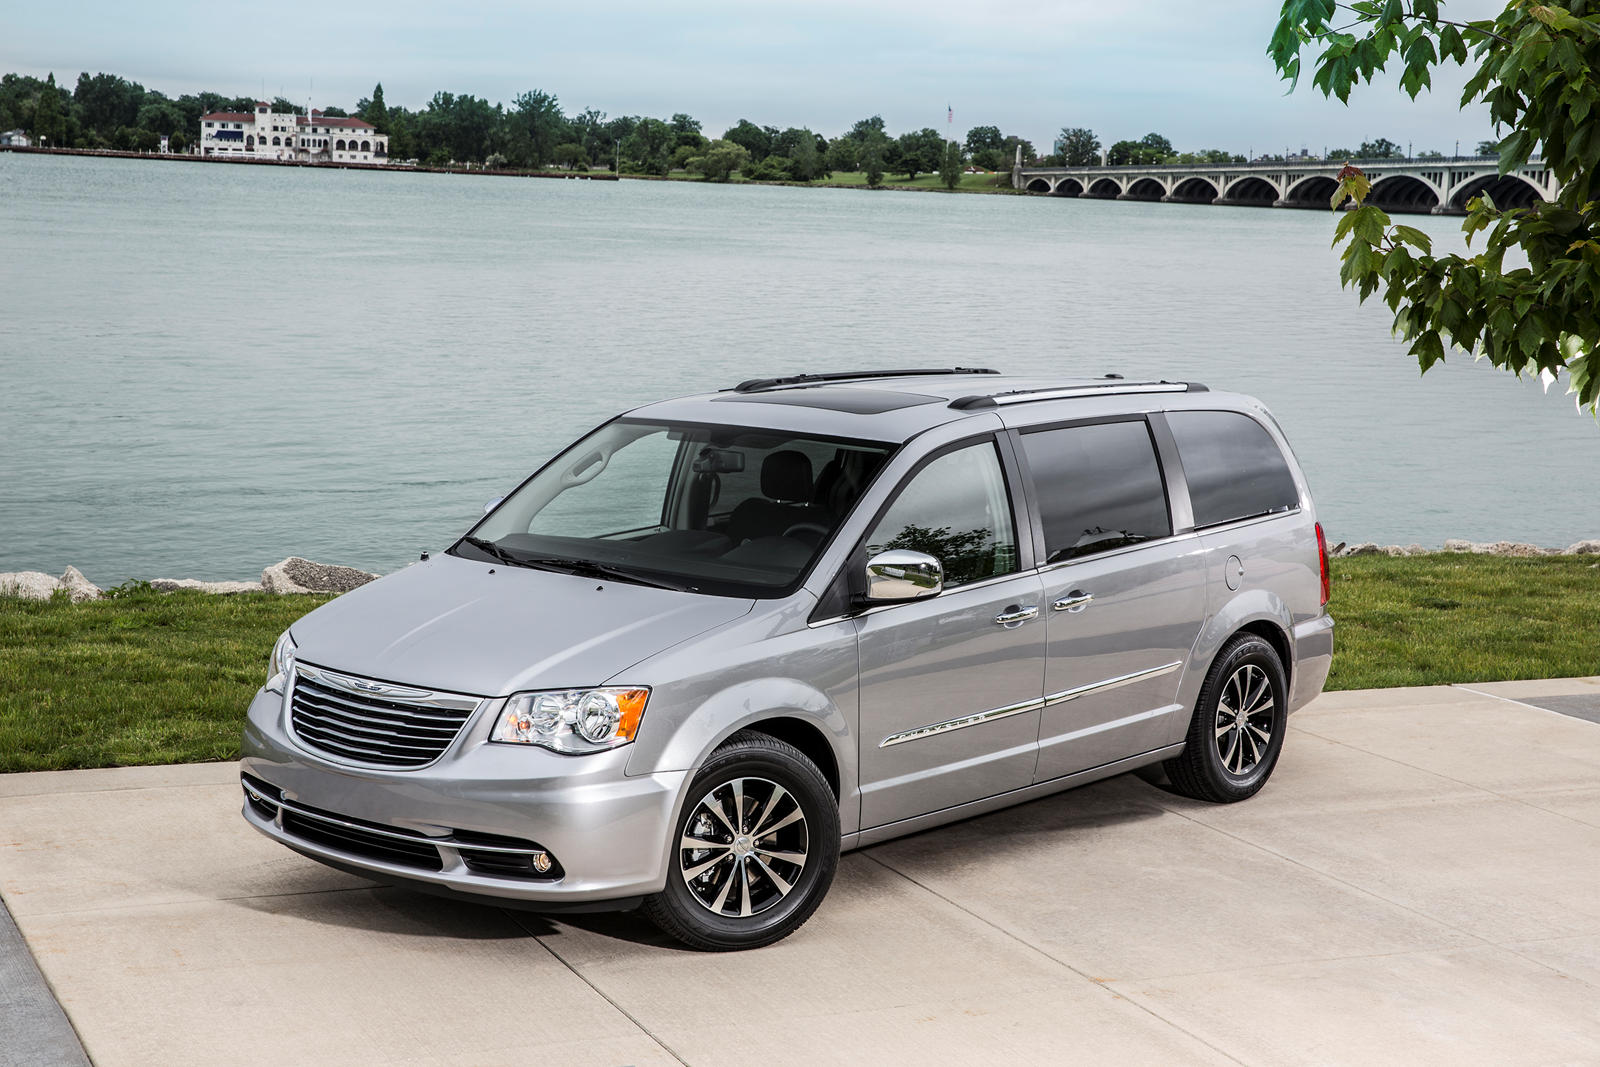 2013 Chrysler Town & Country Review, Trims, Specs, Price